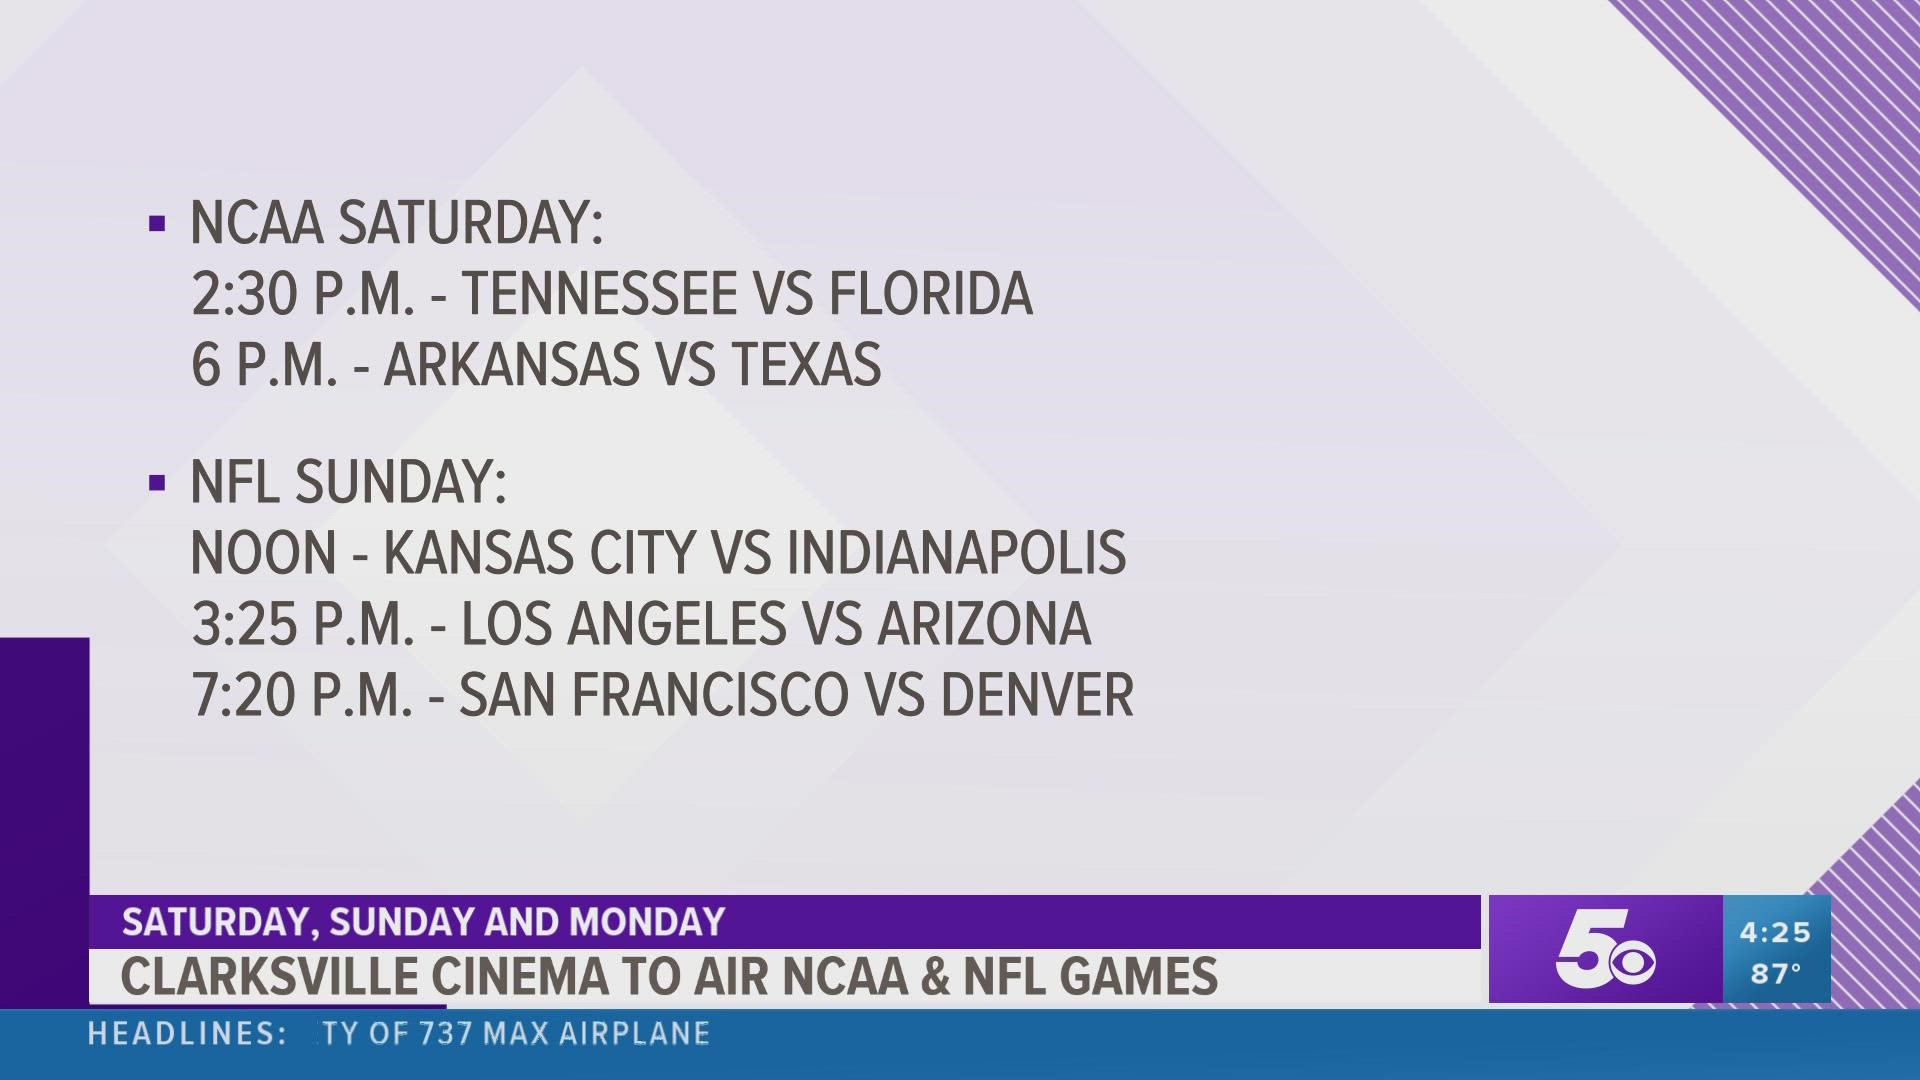 Both NCAA and NFL matches will be available for fans to watch on the big screen!